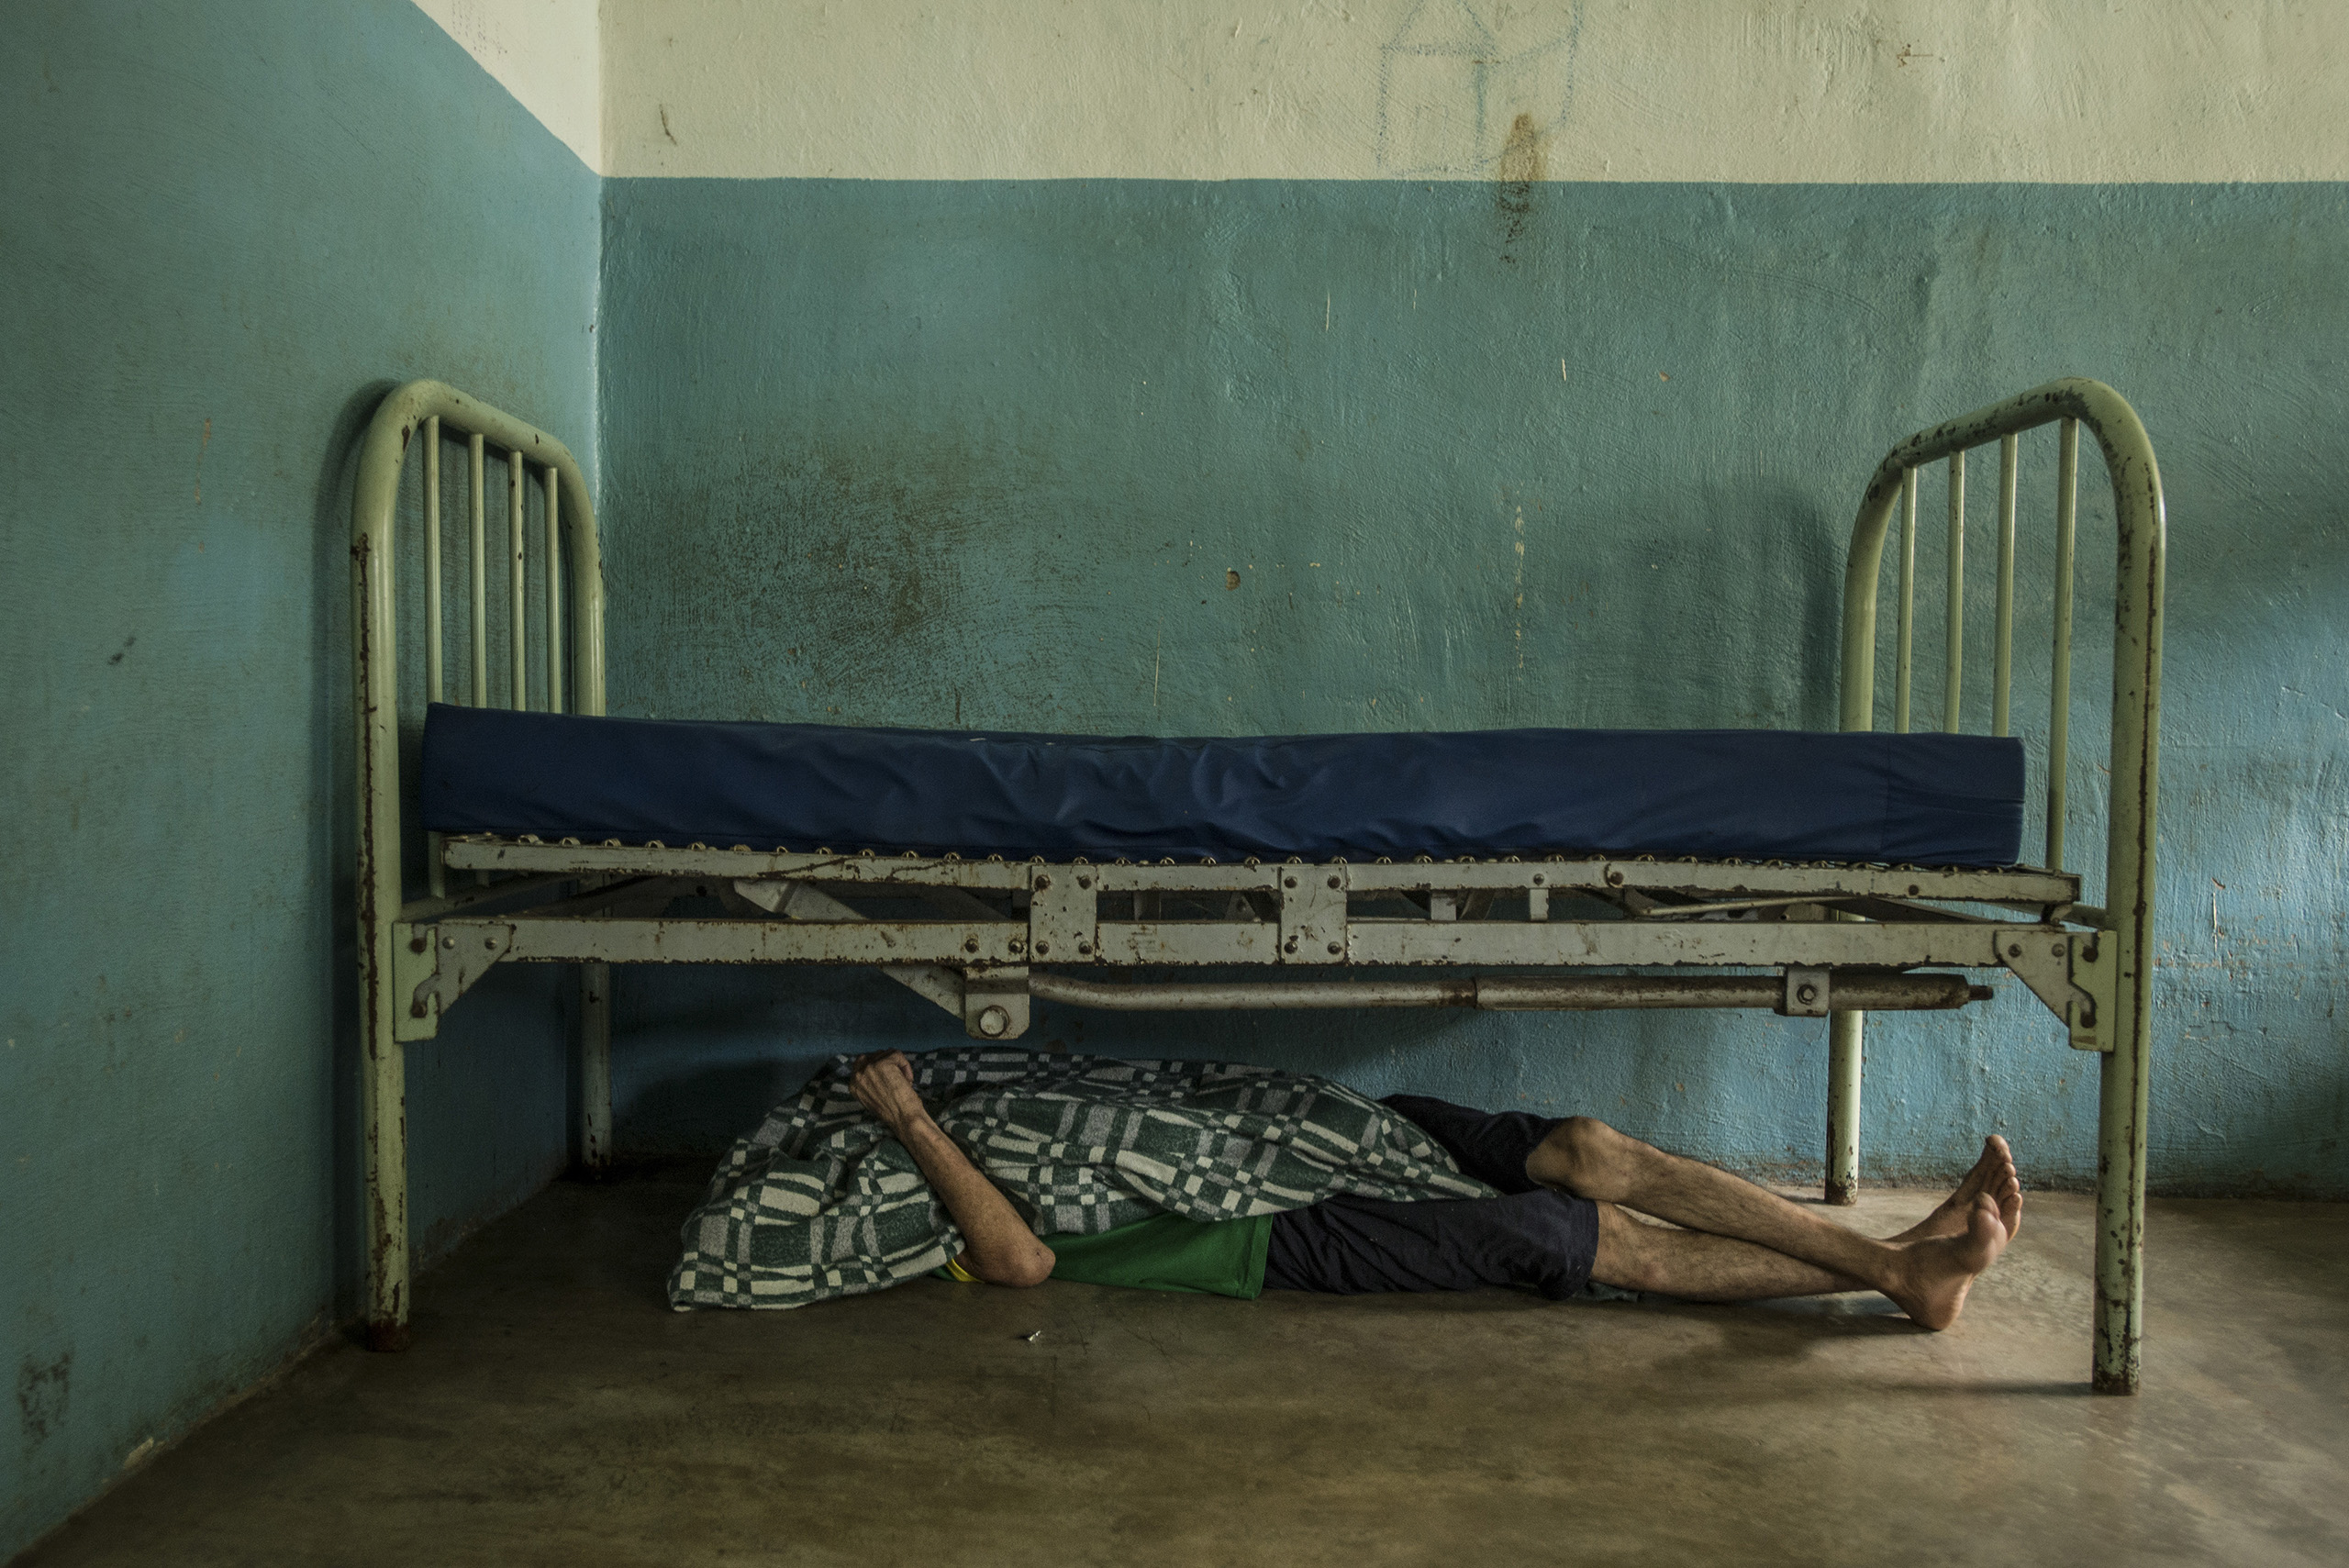 Raul Martinez, who has little medication for his schizophrenia, takes a nap under his bed at the state-run Pampero Psychiatric Hospital in Barquisimeto, Venezuela, on July 28, 2016.